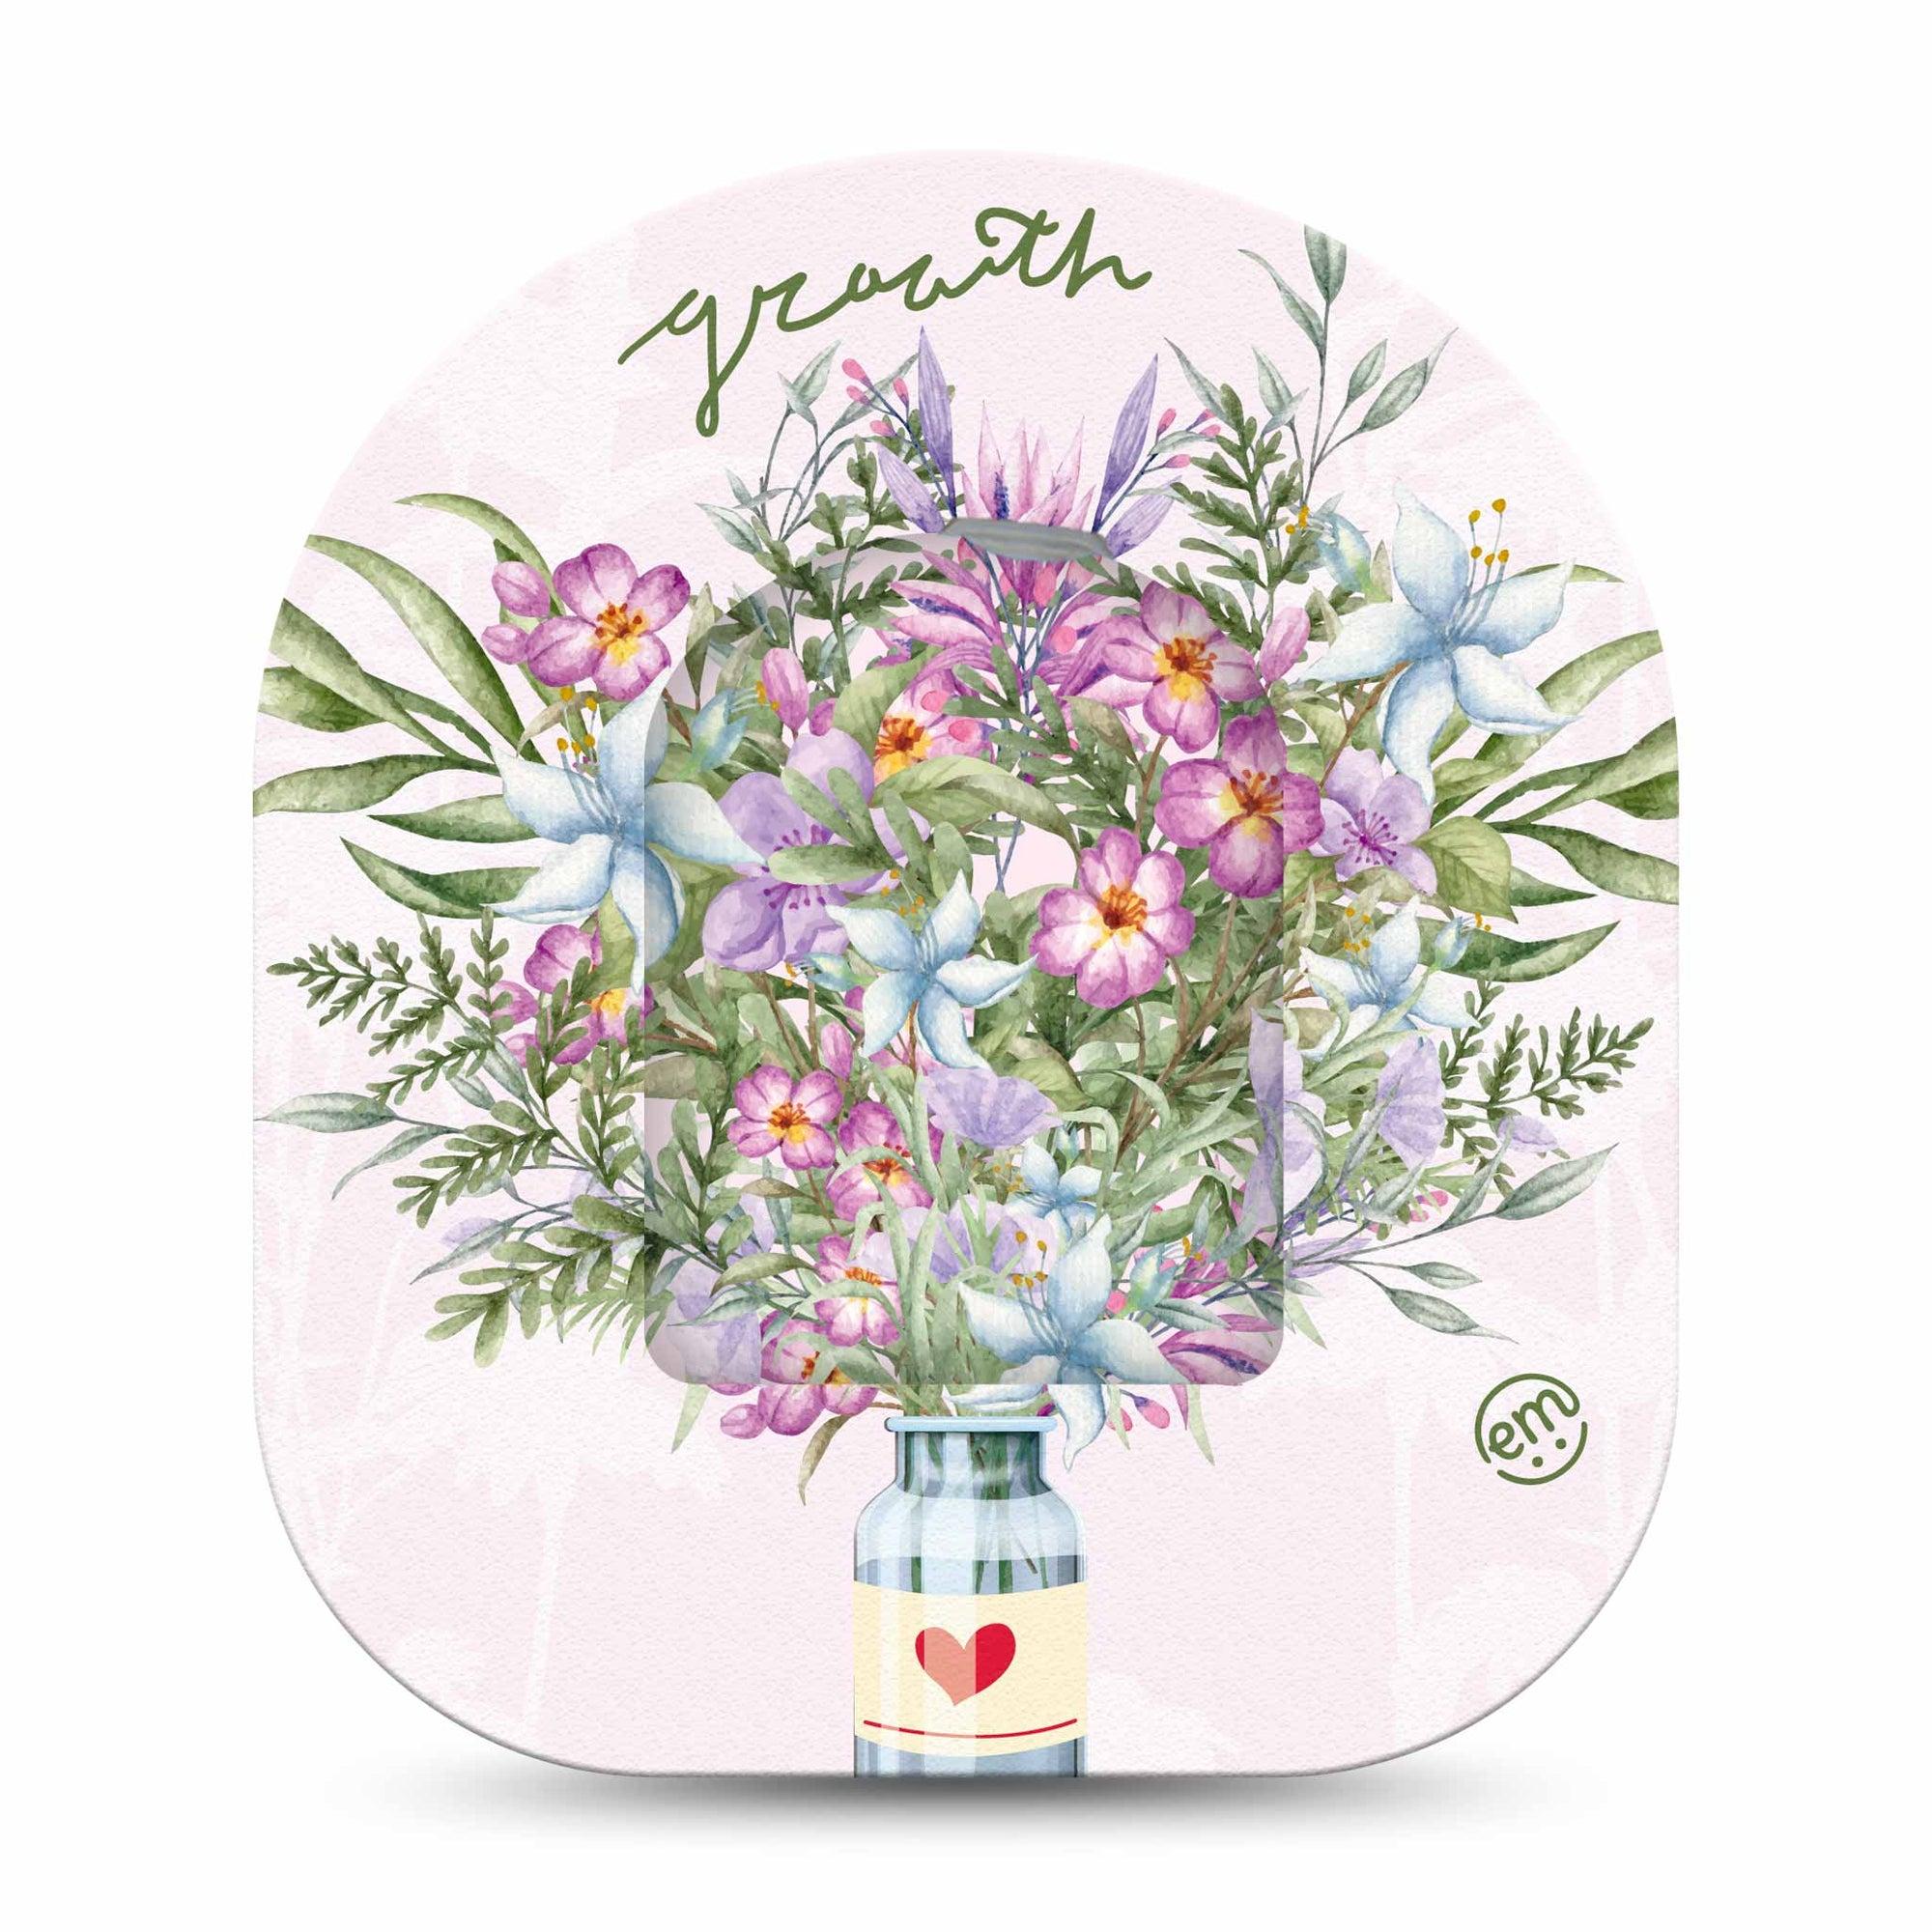 ExpressionMed Thriving Blossoms Omnipod Tape Surface Center Sticker Single Sticker with matching Single Pod Tape Floral Bouquet Inspired Vinyl Decoration Pump Design